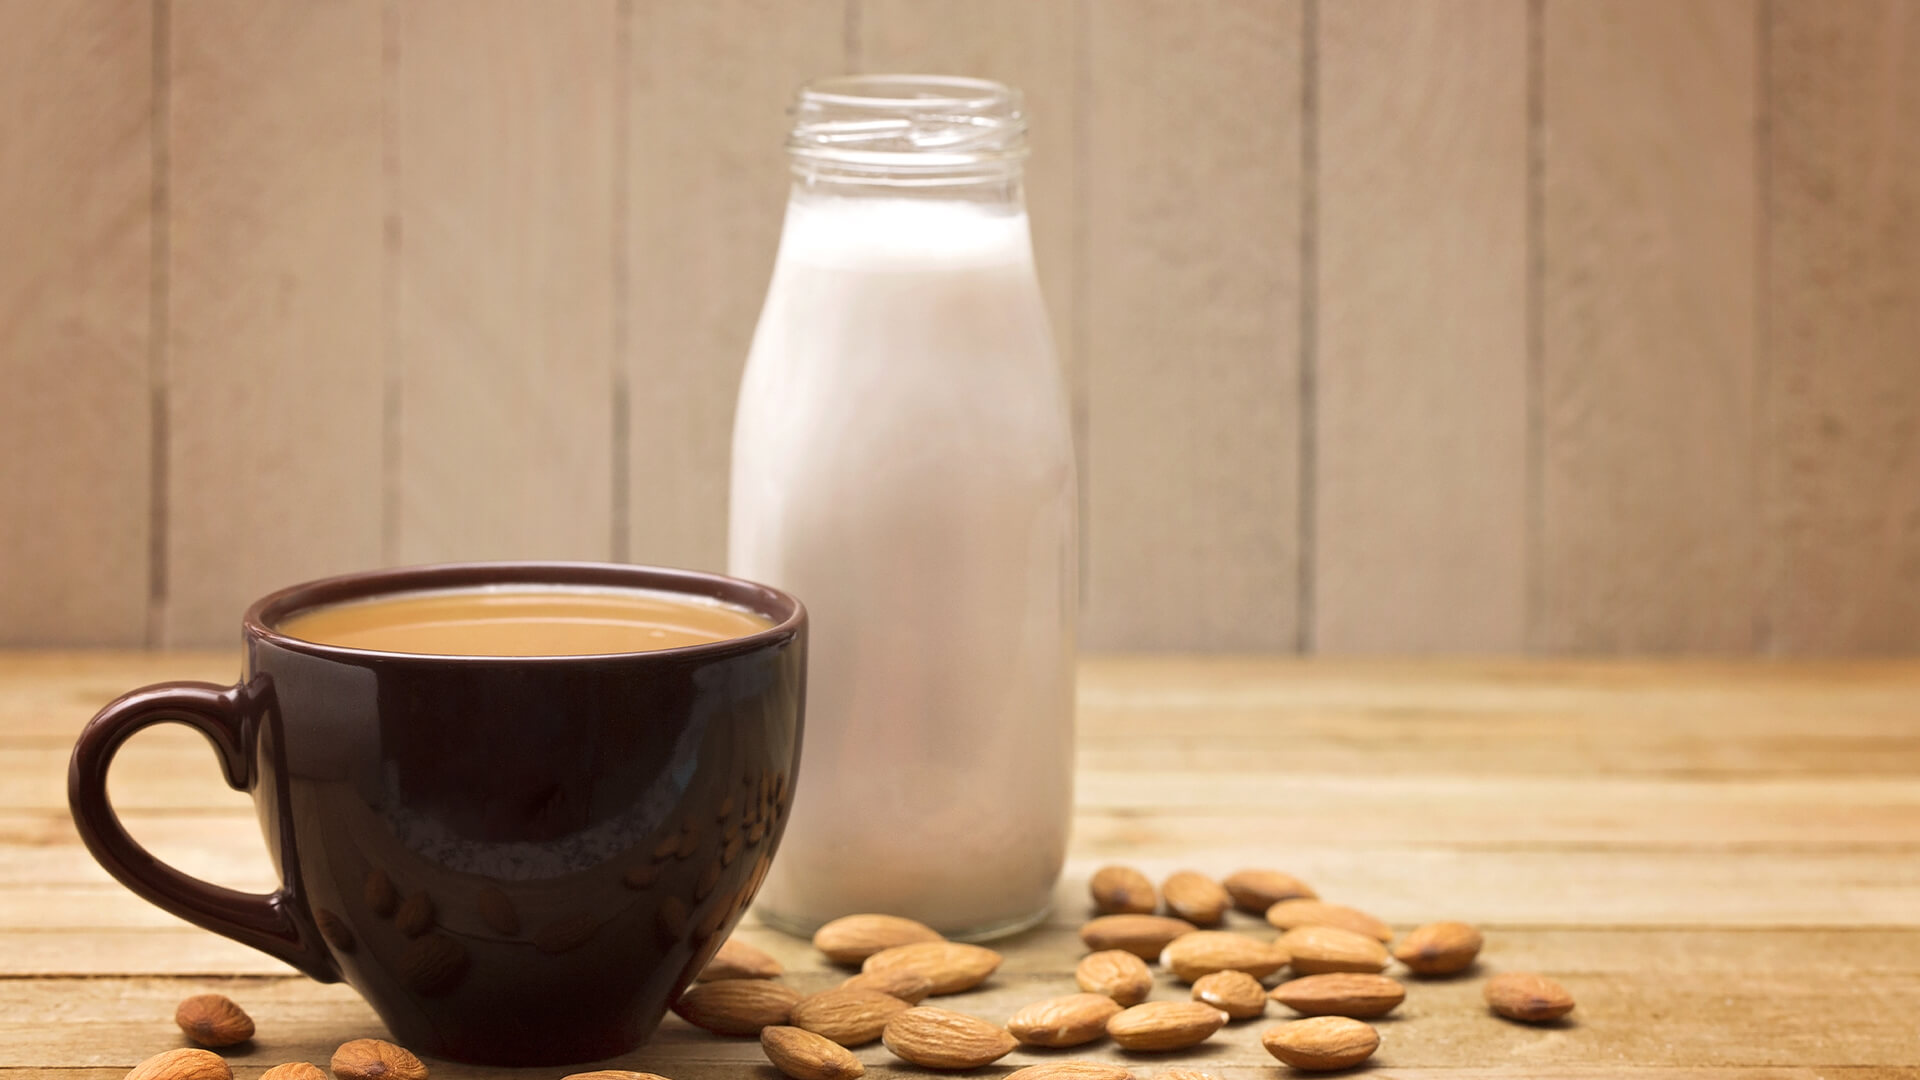 Are You Nuts Over Coffee? The Rise of the Milk Alternatives